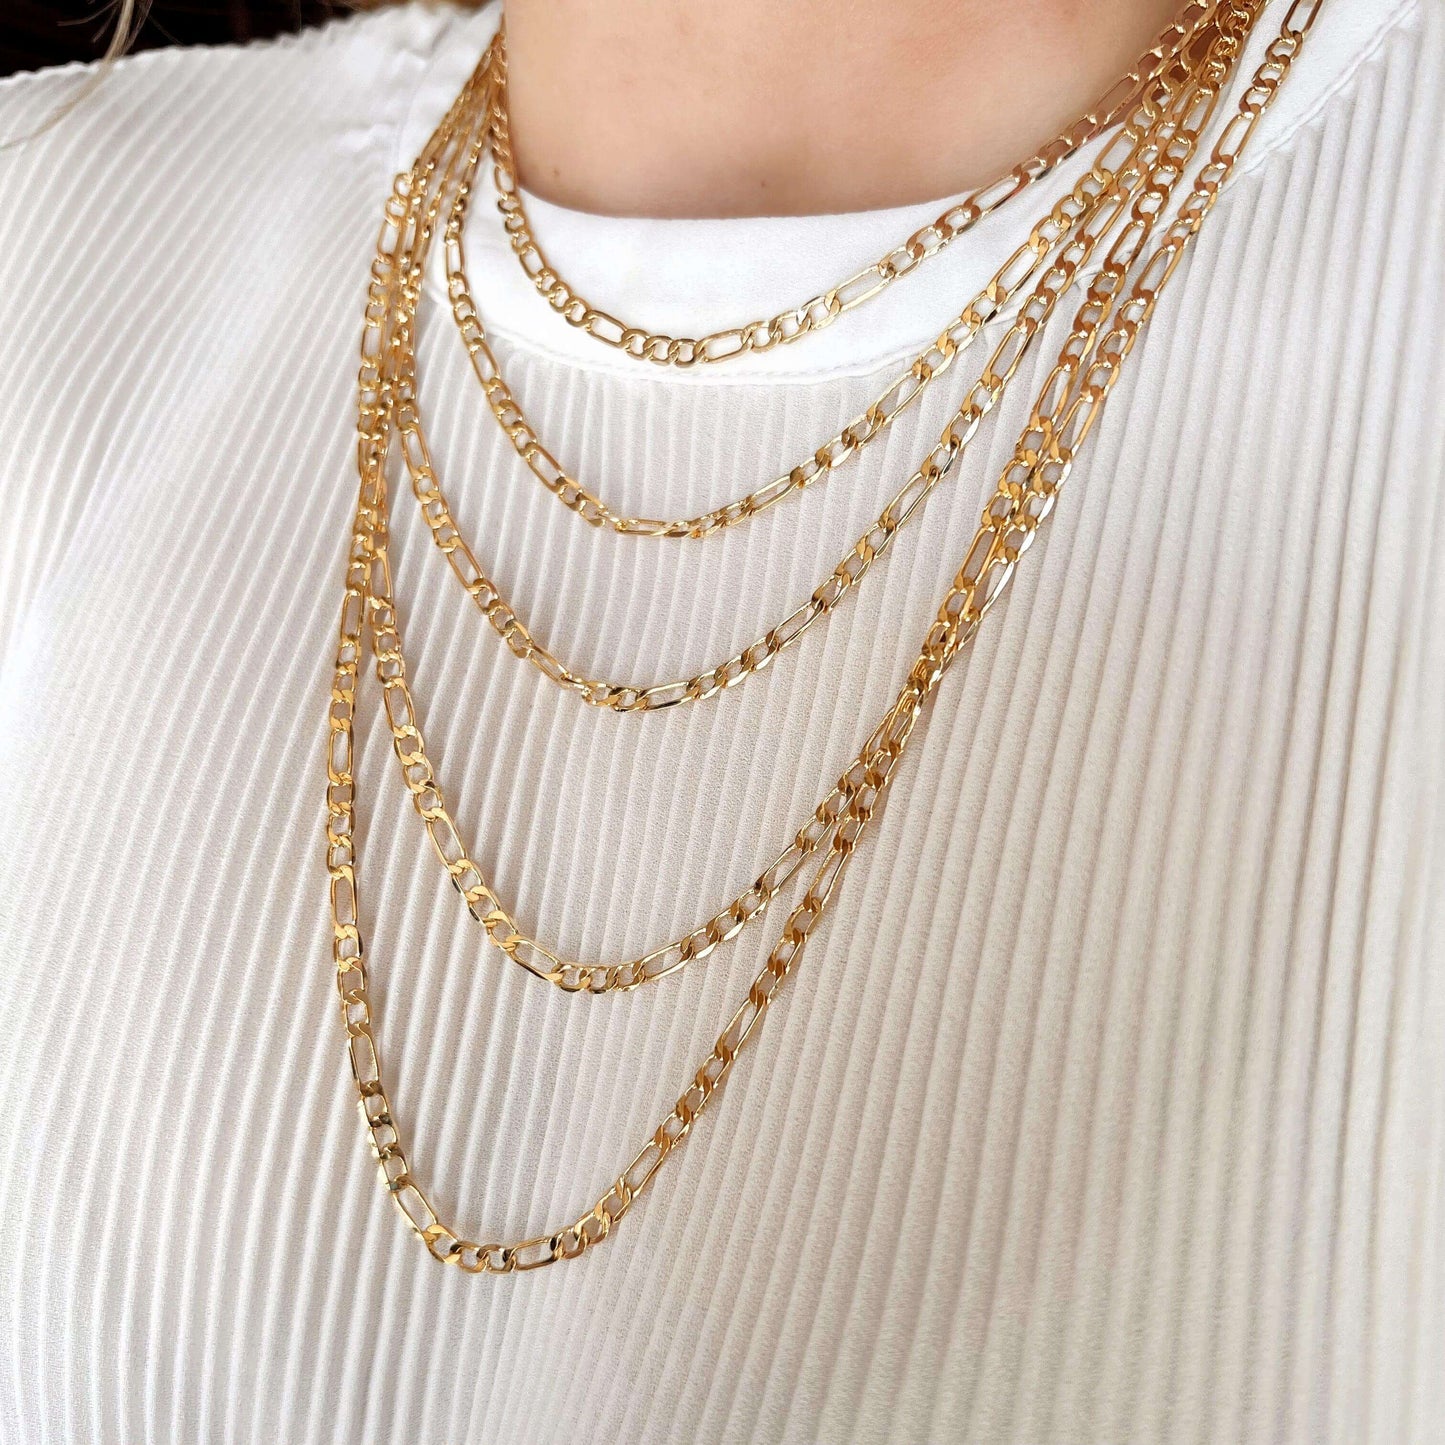 GoldFi 18k Gold Filled Classic Figaro Chain Necklace